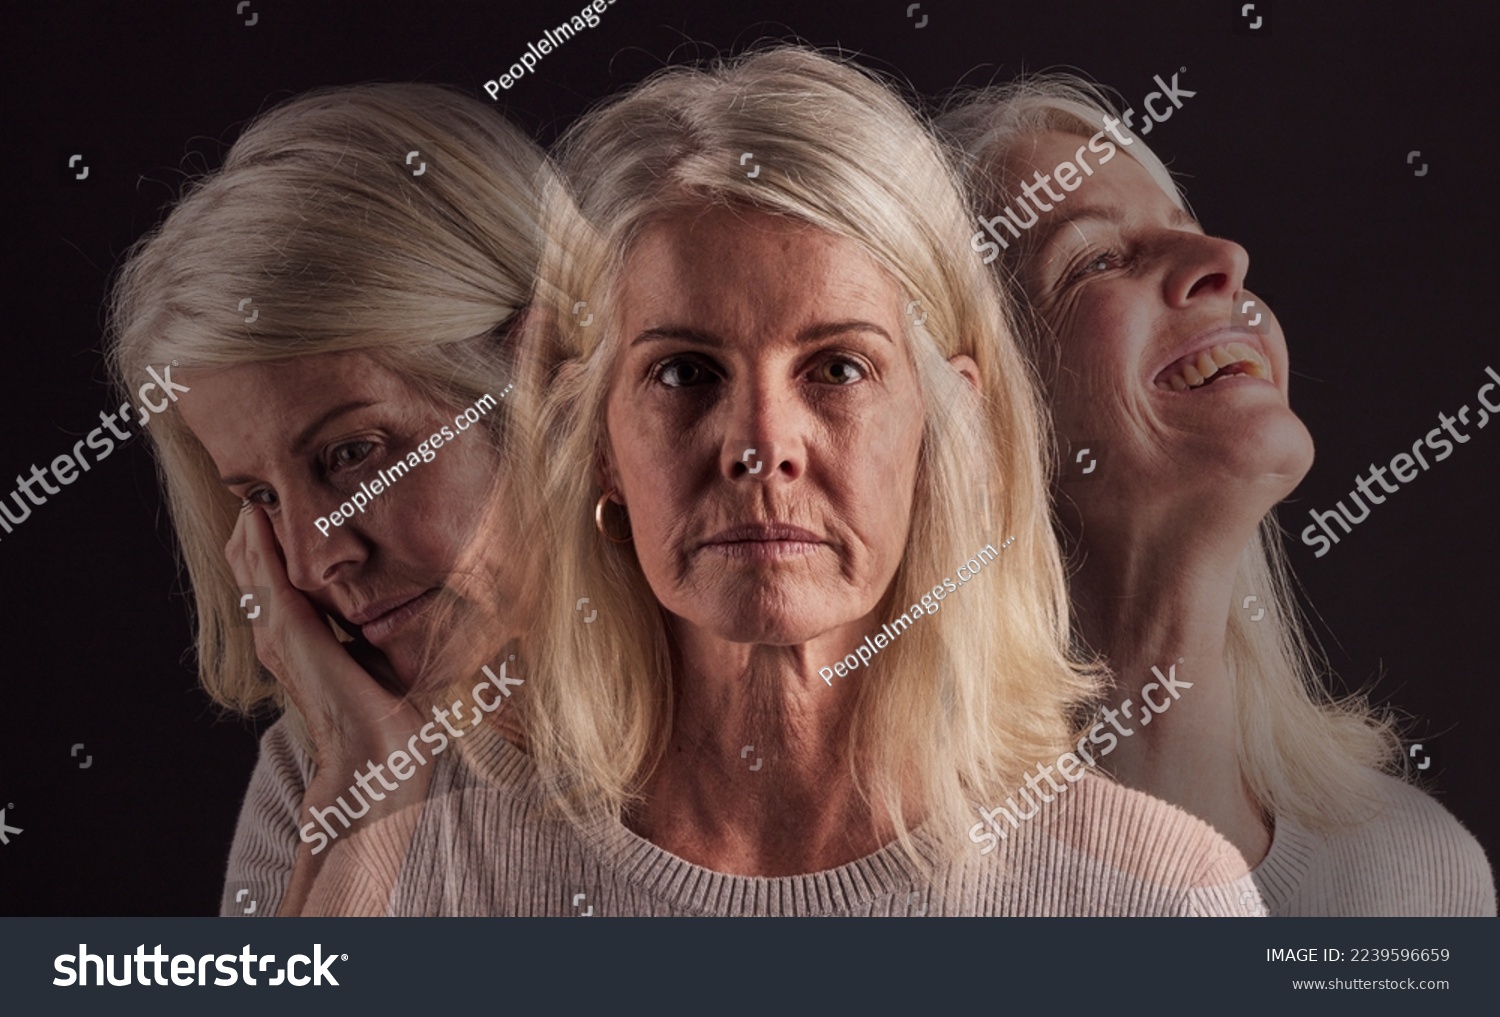 Senior woman, bipolar or mental health for depression, psychology or mood swings. Mature female, depressed or schizophrenia with identity crisis, trauma anxiety or problem with portrait, sad or smile #2239596659